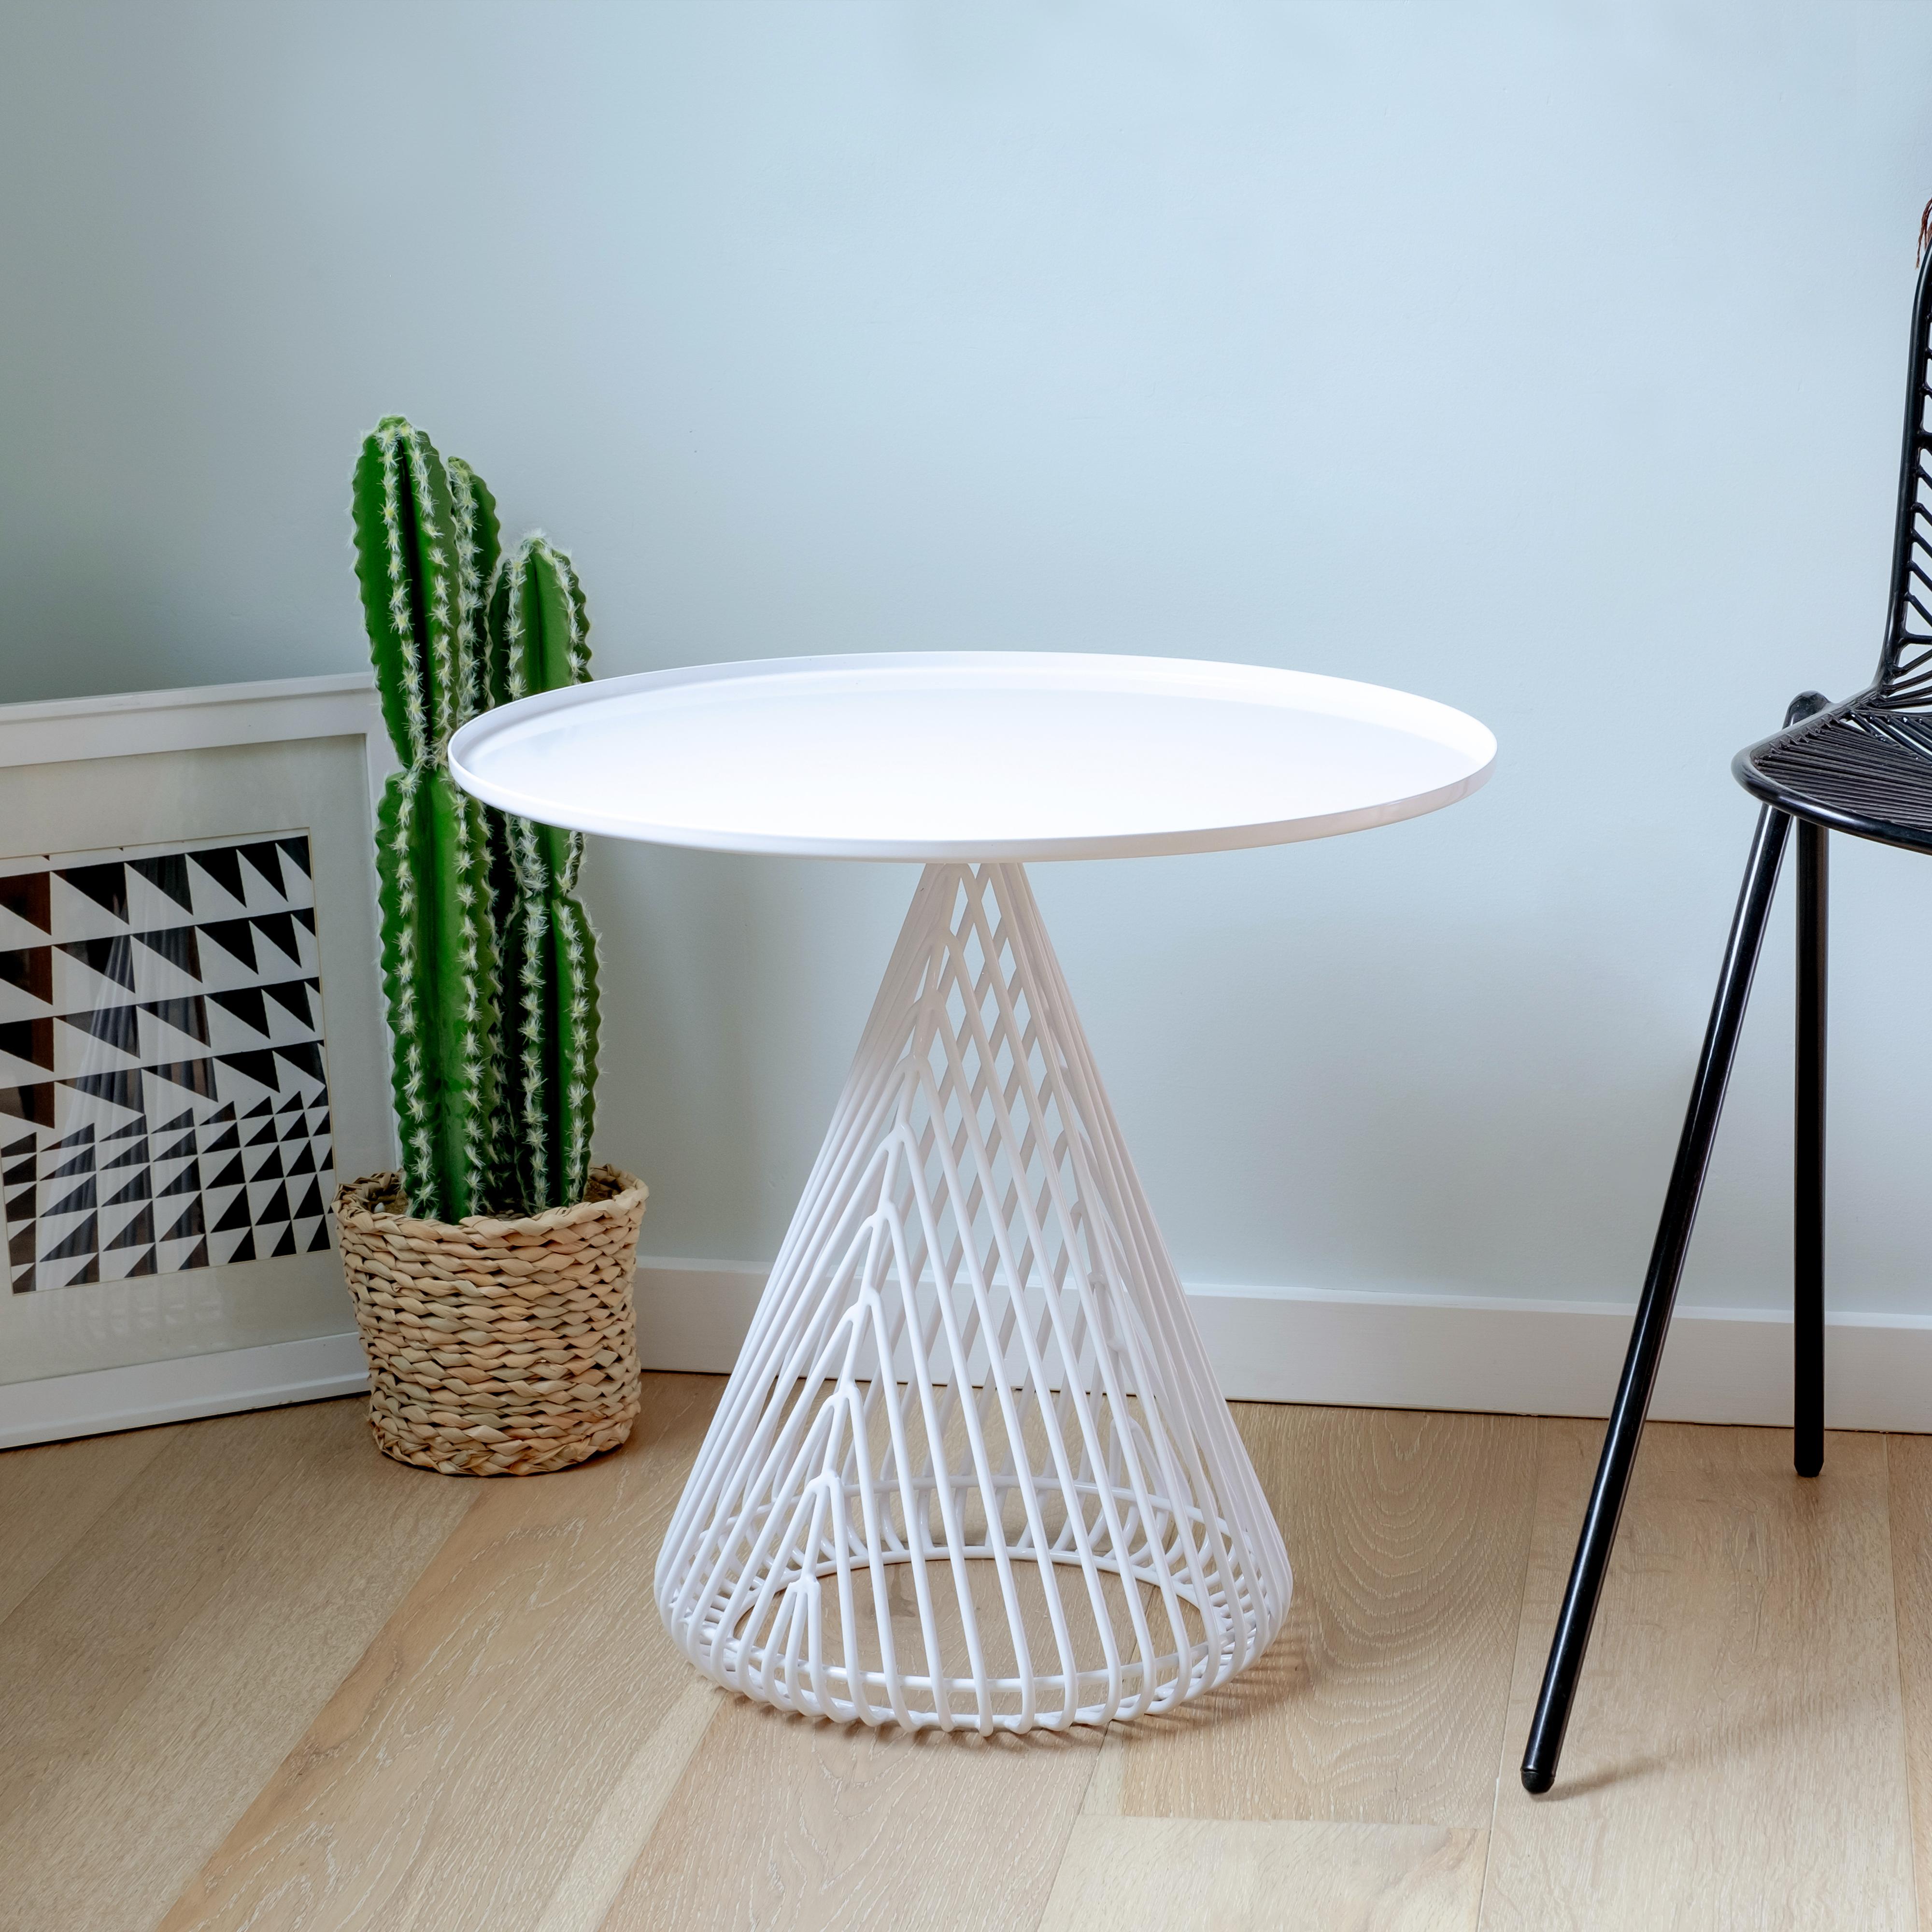 Powder-Coated Mid-Century Modern Cono Table, Side Table by Bend Goods in Peacock Blue